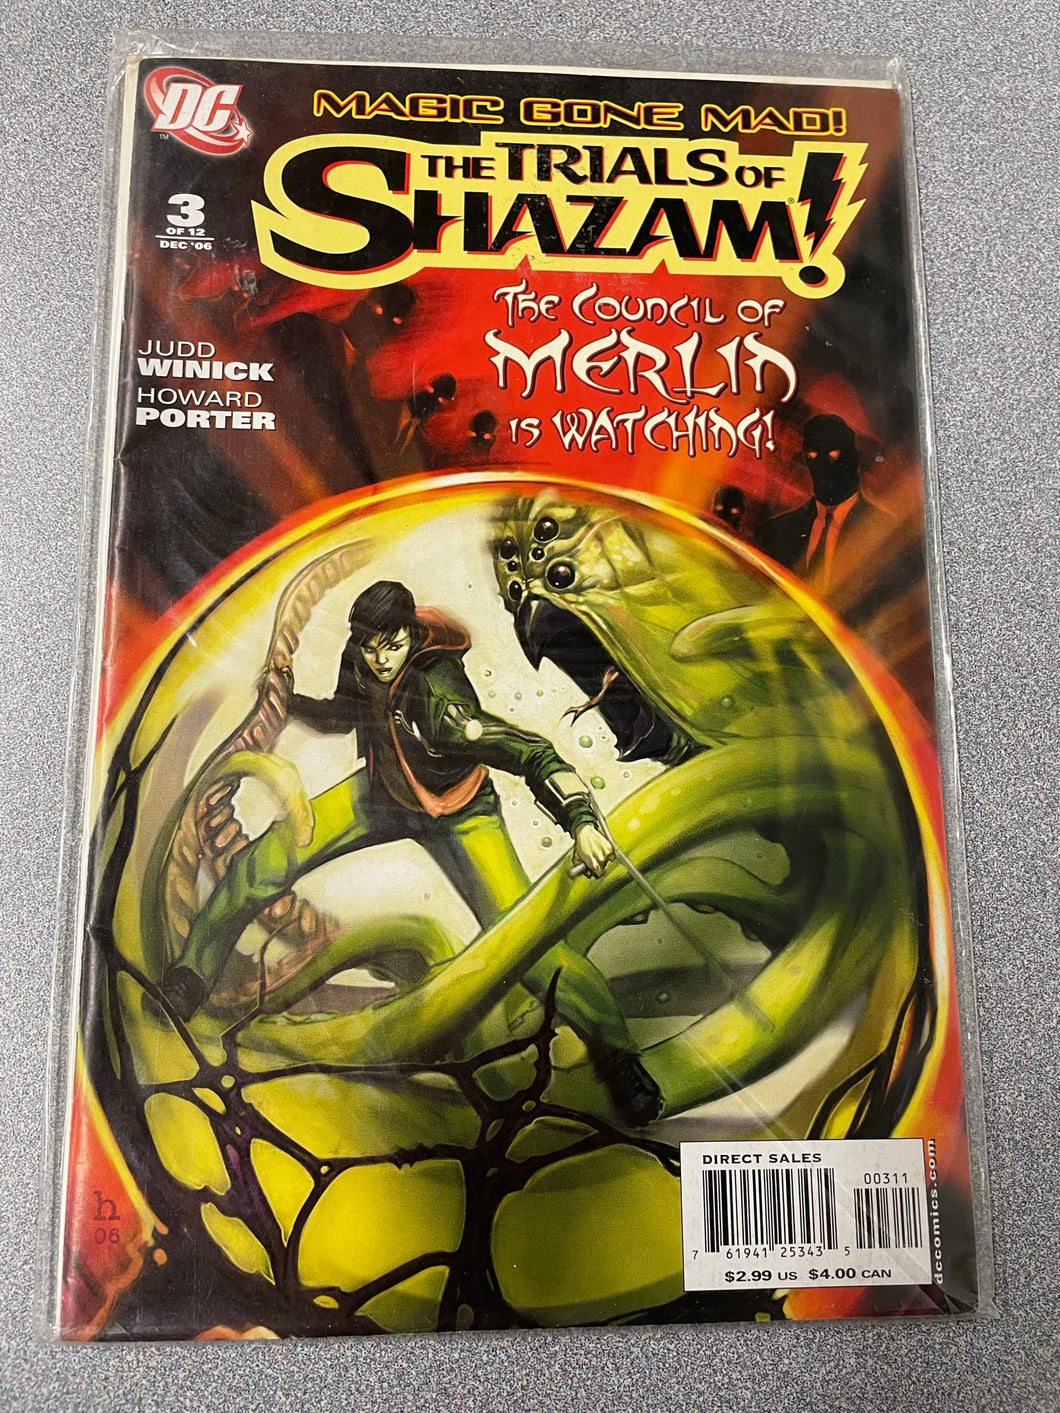 DC Comics The Trials of Shazam!: The Council of Merlin is Watching, Winick, Judd and Howard Porter [2006] GN 1/23